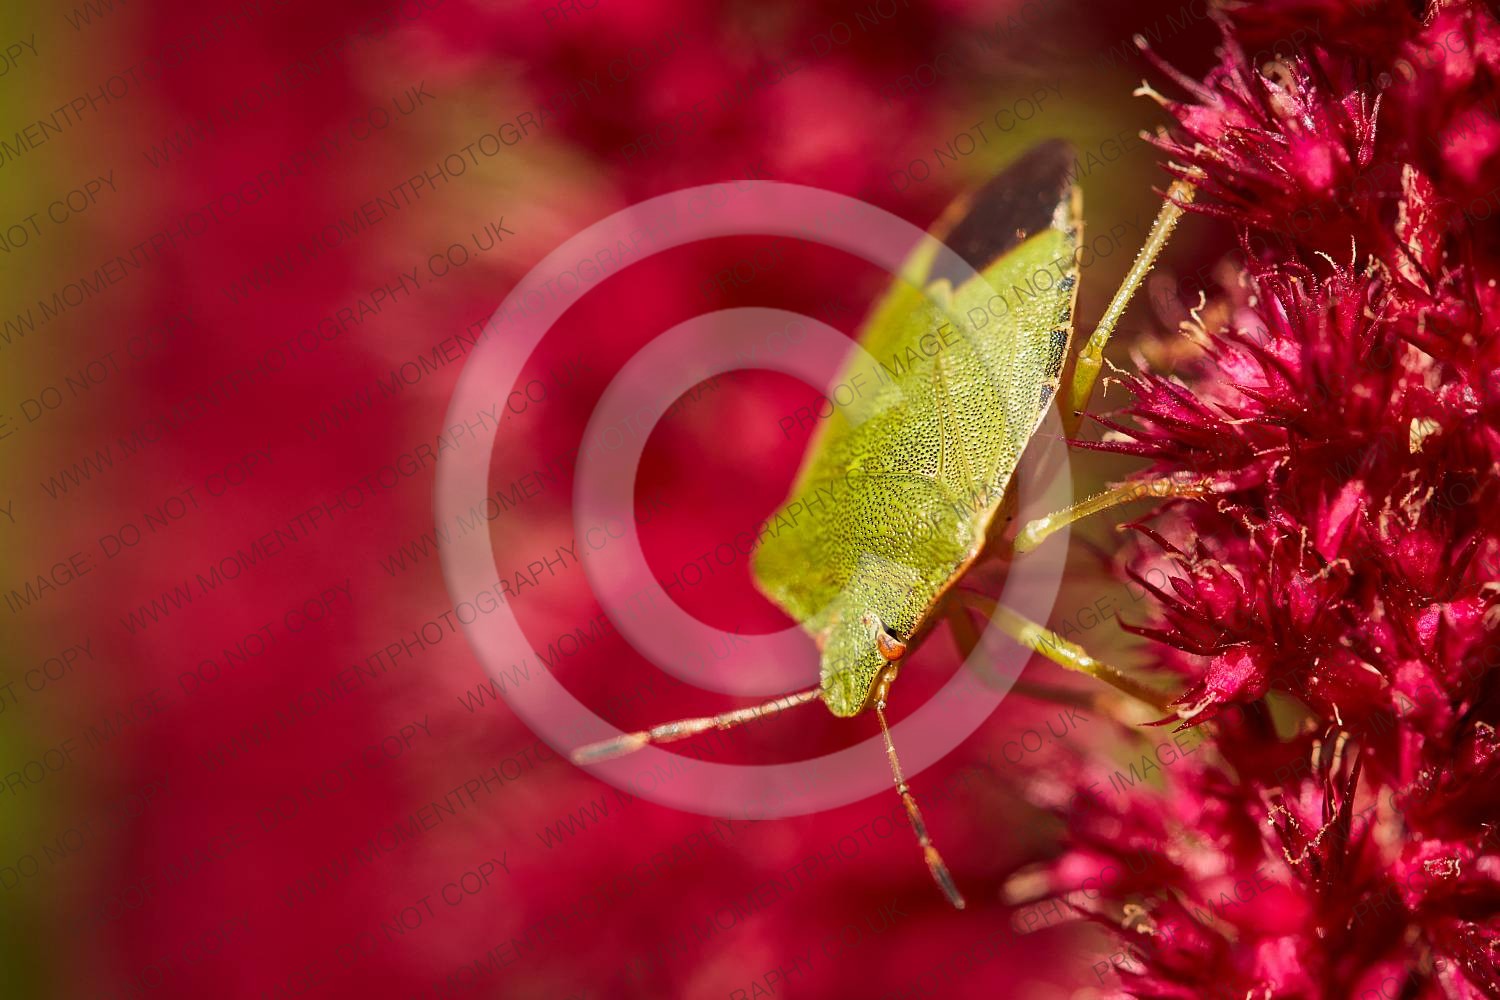 2020, autumn, bloom, bridgwater photographer, bug, chard, closeup, date, daytime, england, environment, fauna, flora, floral, flower, garden, green, green shield bug, insect, insects, macro, moment photography, natural, nature, outdoor, outside, pentatomidae, pest, places, red, september, shield, shield bug, somerset, somerset photographer, somerset photography, south west, south west england, stink, stink bug, summer, sunday, sunny, united kingdom, wildlife, wildlife conservation, zoology